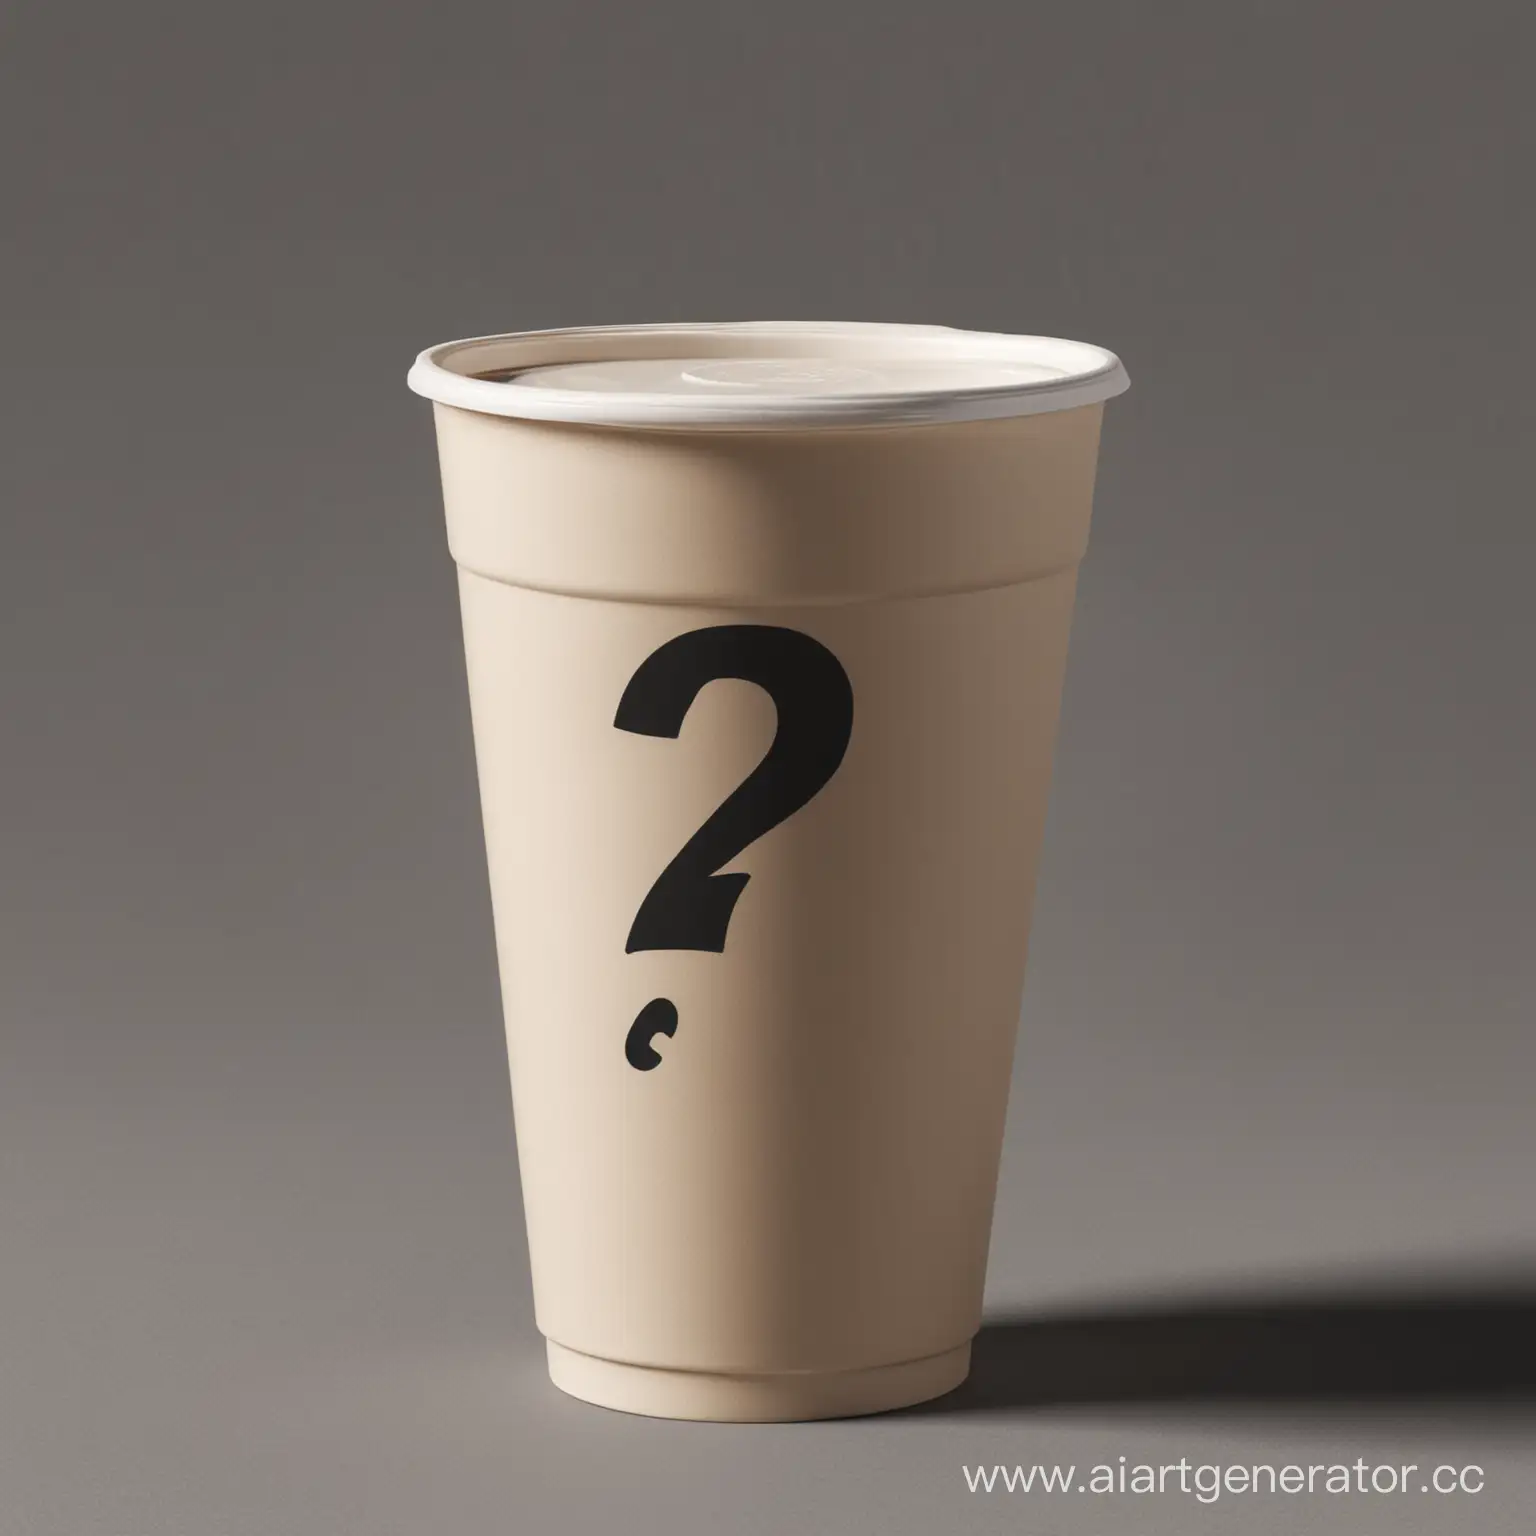 make me a product package which is hiden in the darkes with a question mark on it. It is a new product, a drink. Make the package a 750 ml Plastic cup.